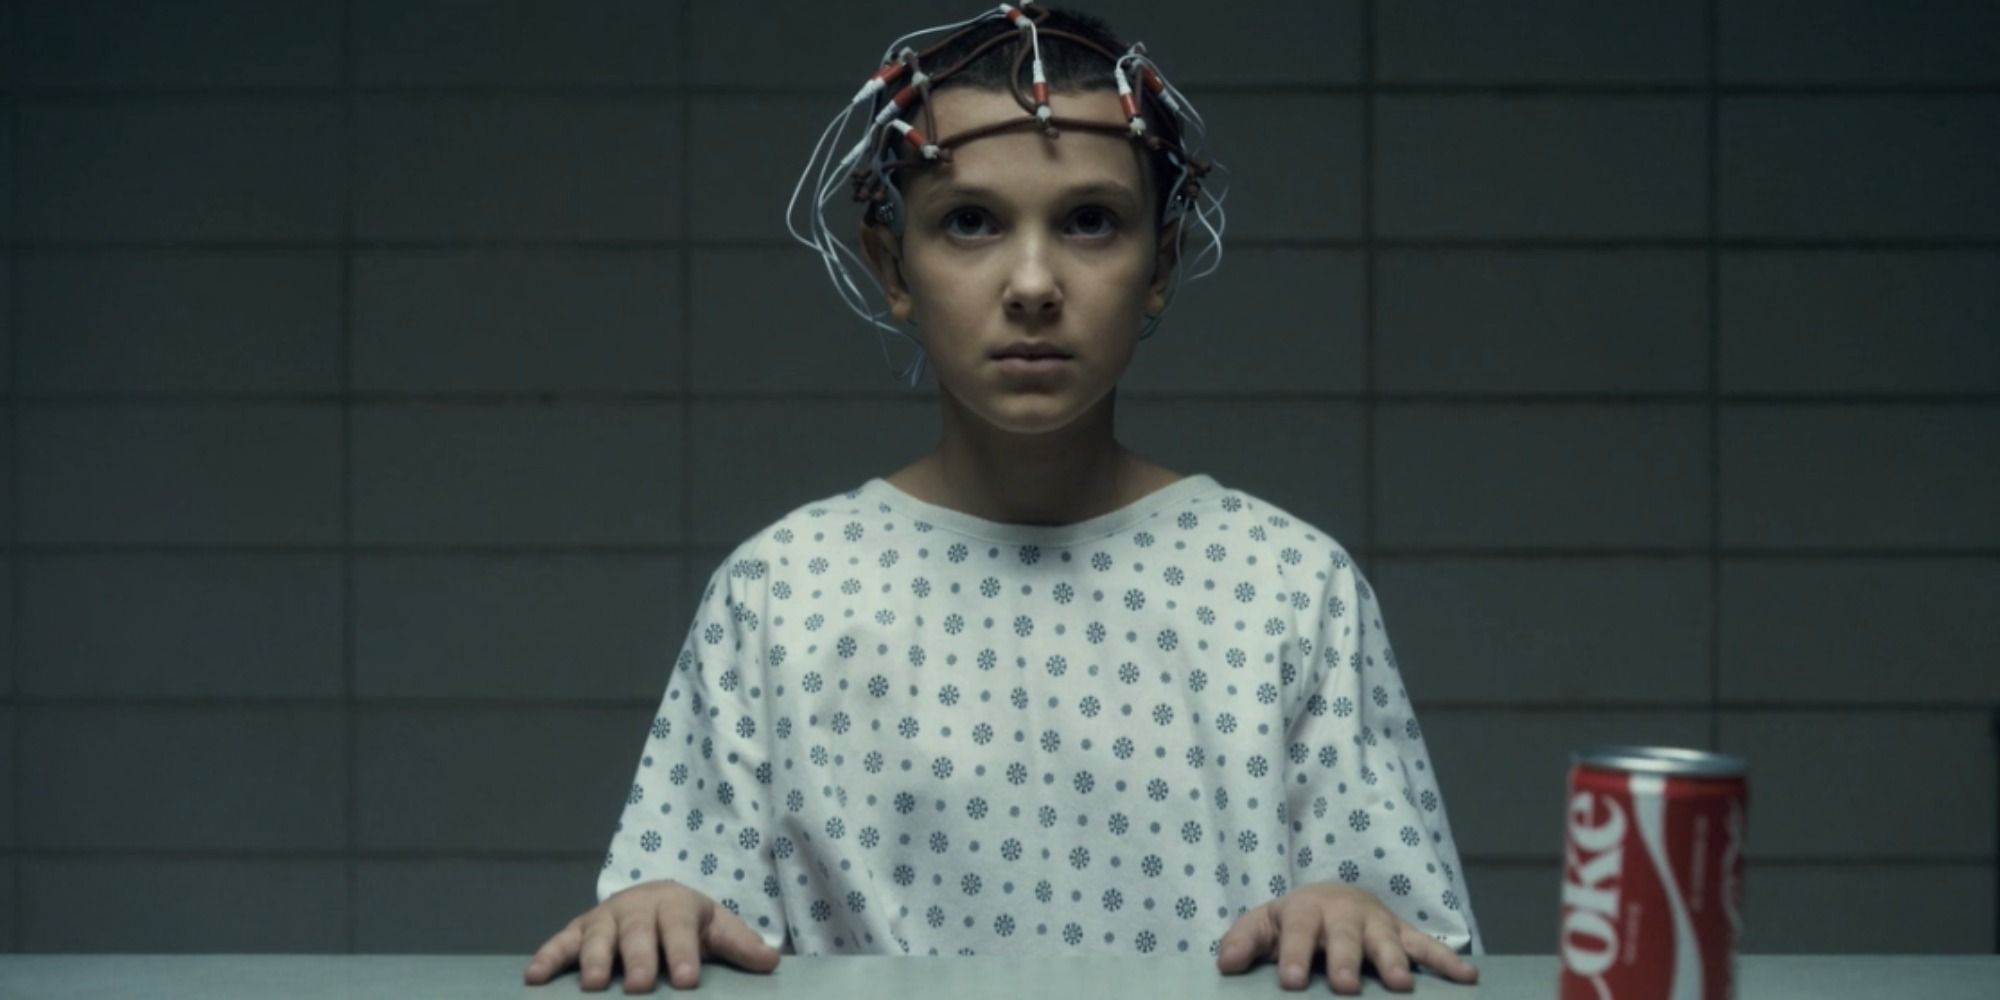 A screenshot of Eleven being tested by Dr. Brenner of her psychokinetic abilities in Stranger Things